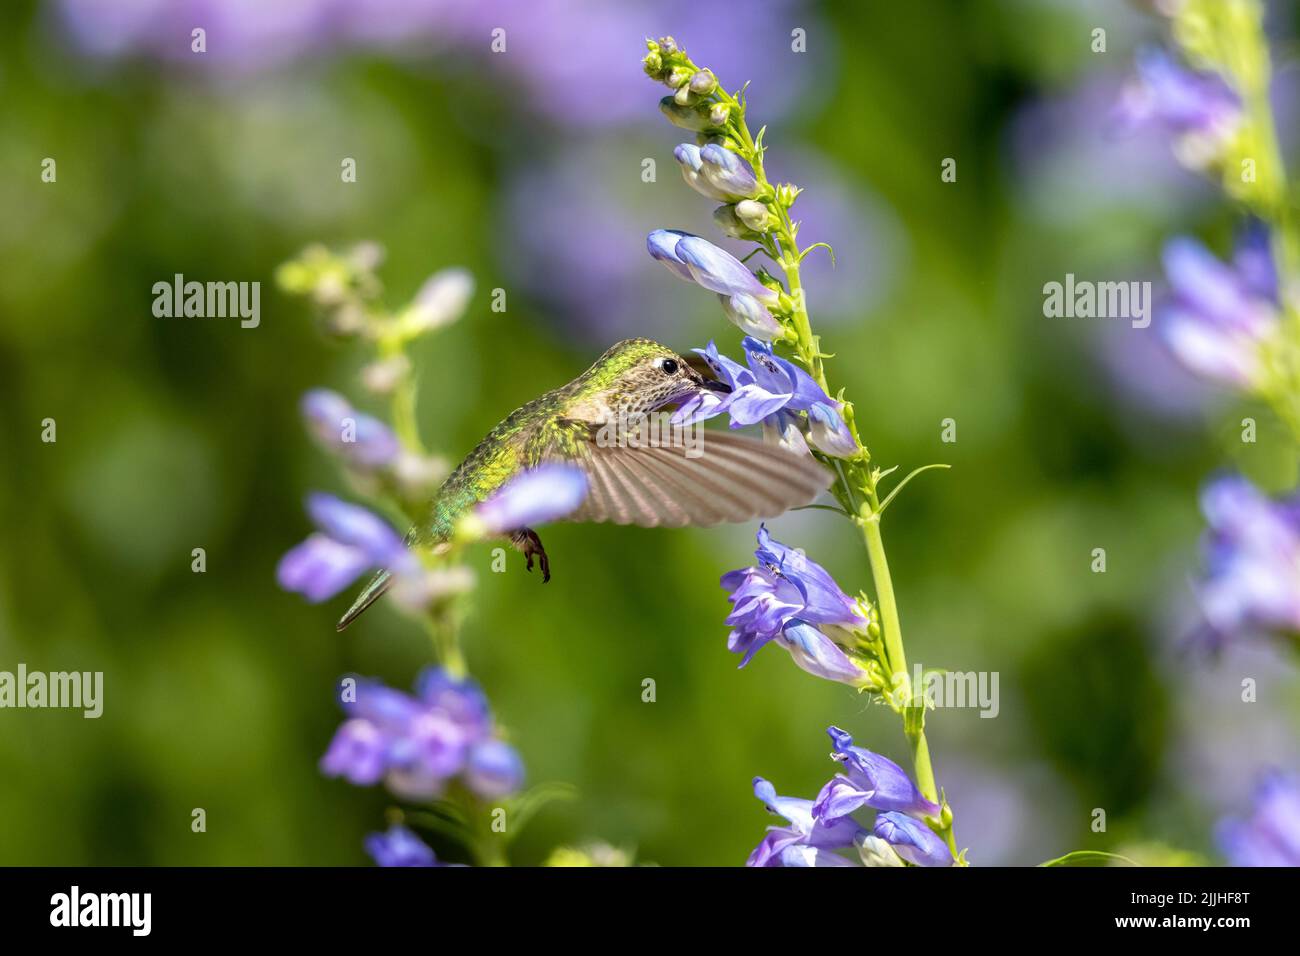 A female Broad-tailed Hummingbird drinking nectar from the flower of a Rocky Mountain Penstemon plant, with a soft garden background. Stock Photo